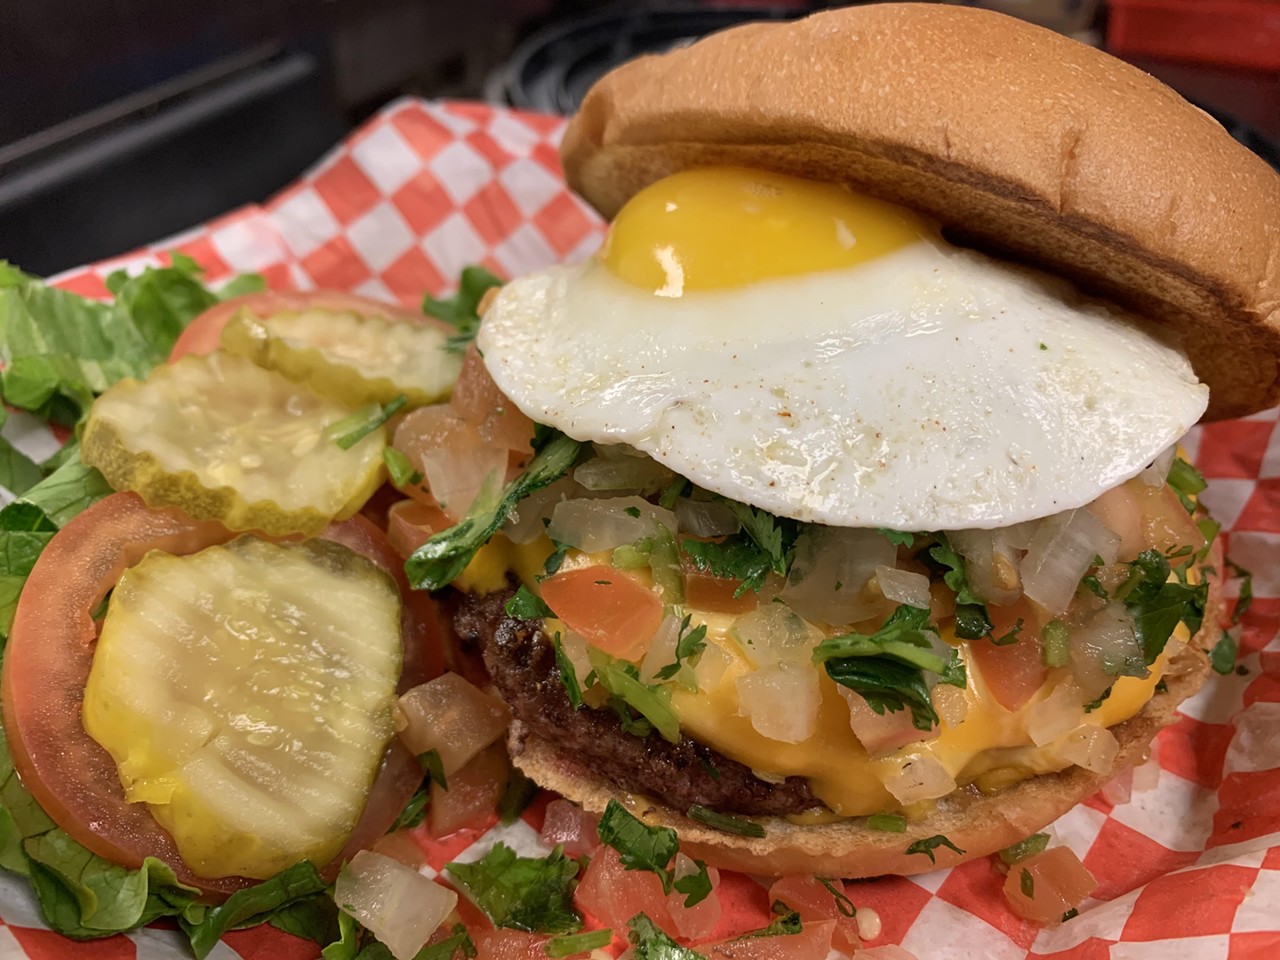 Big'z Burger Joint
Dine-in and Curbside, Multiple Locations, bigz-burgerjoint.com
Cascarone Burger, $8, 1/2 lb. certified Angus beef burger topped with cheddar cheese, pico de gallo and a sunny side up fried egg. 
Photo courtesy of Big’z Burger Joint